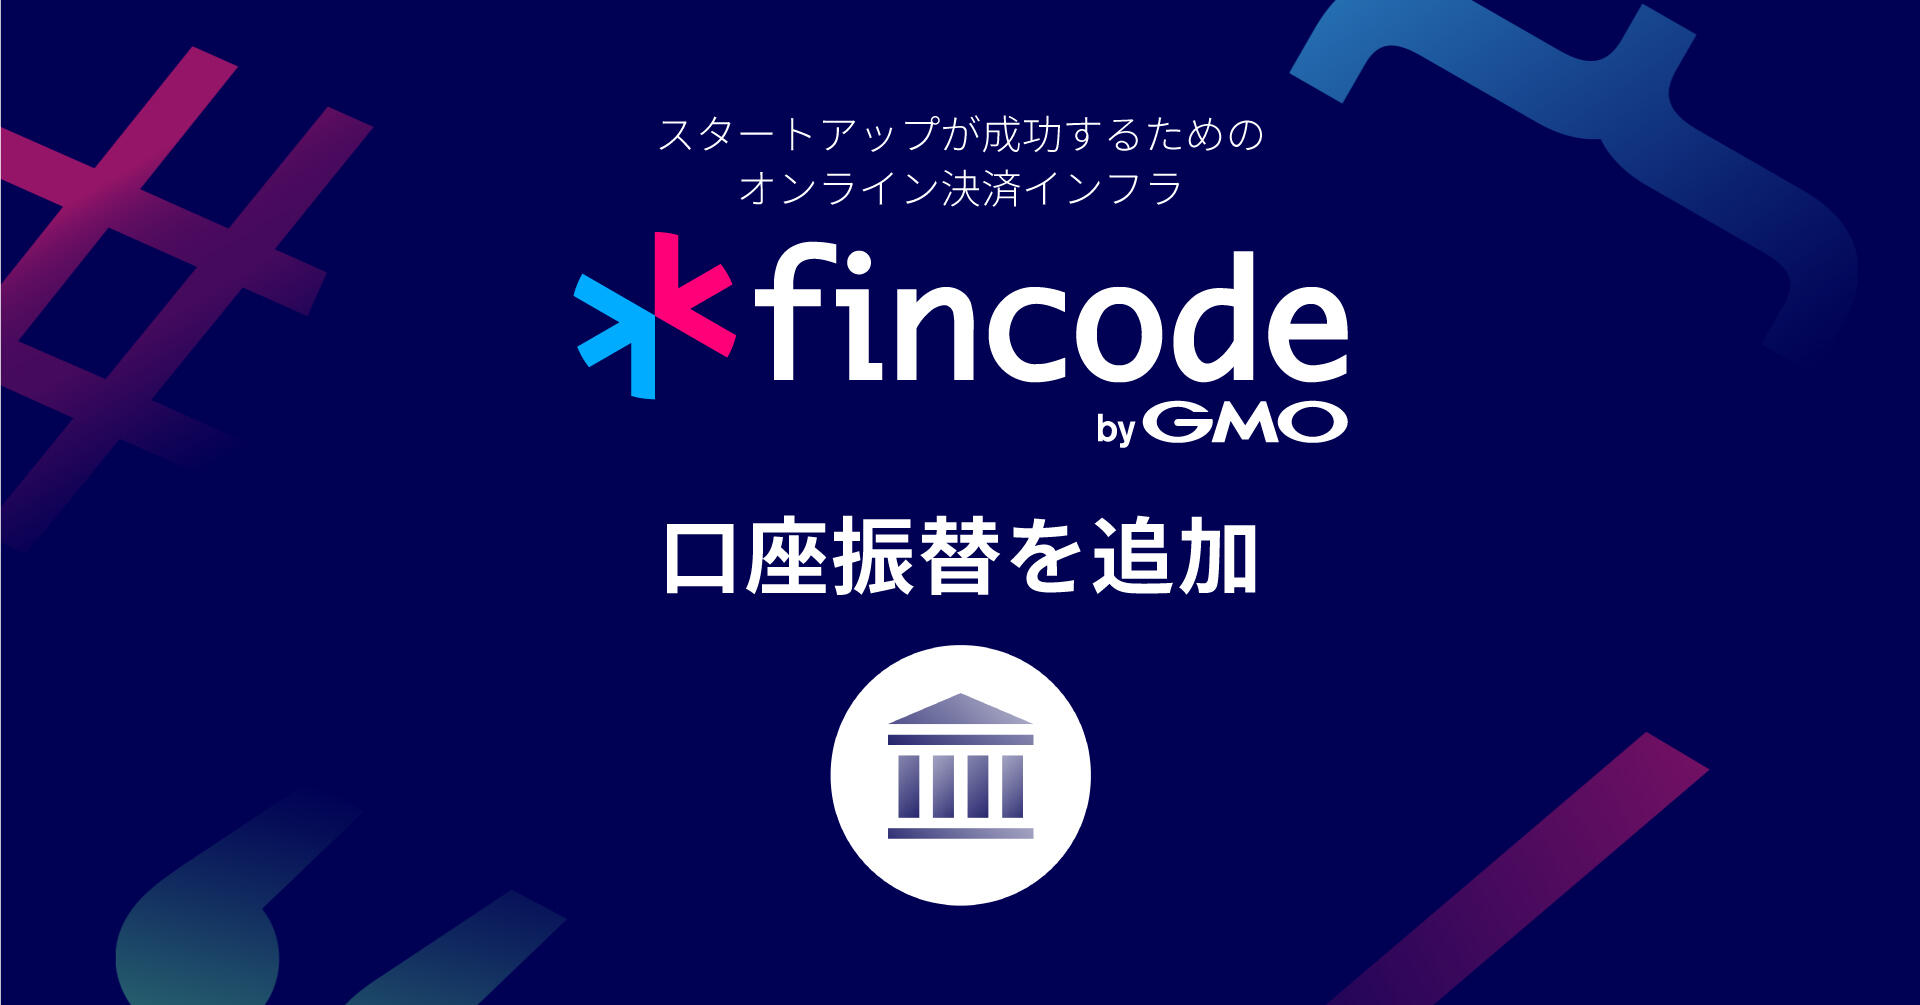 Online infrastructure of payments "fincode byGMO", payment methodsAdd "Account transfer" to